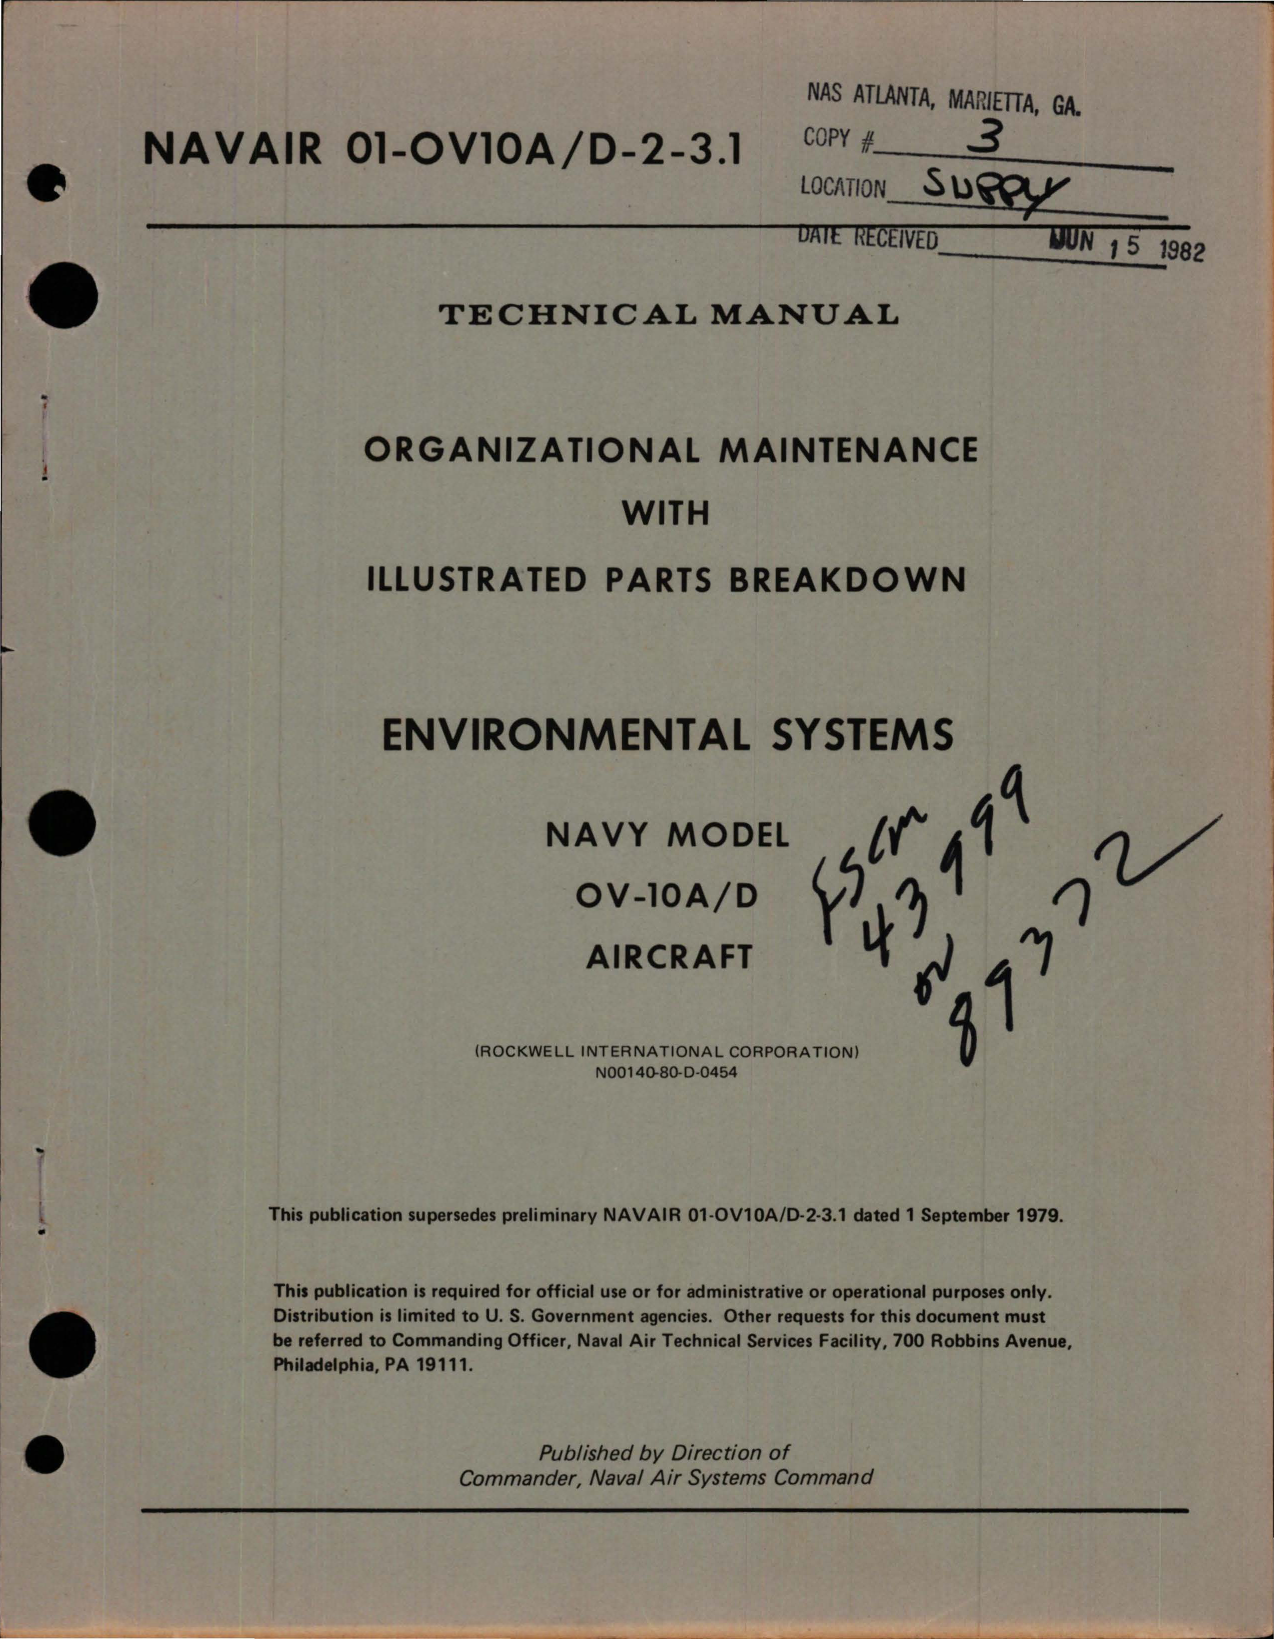 Sample page 1 from AirCorps Library document: Organizational Maintenance with Illustrated Parts Breakdown for Environmental Systems for OV-10A/D